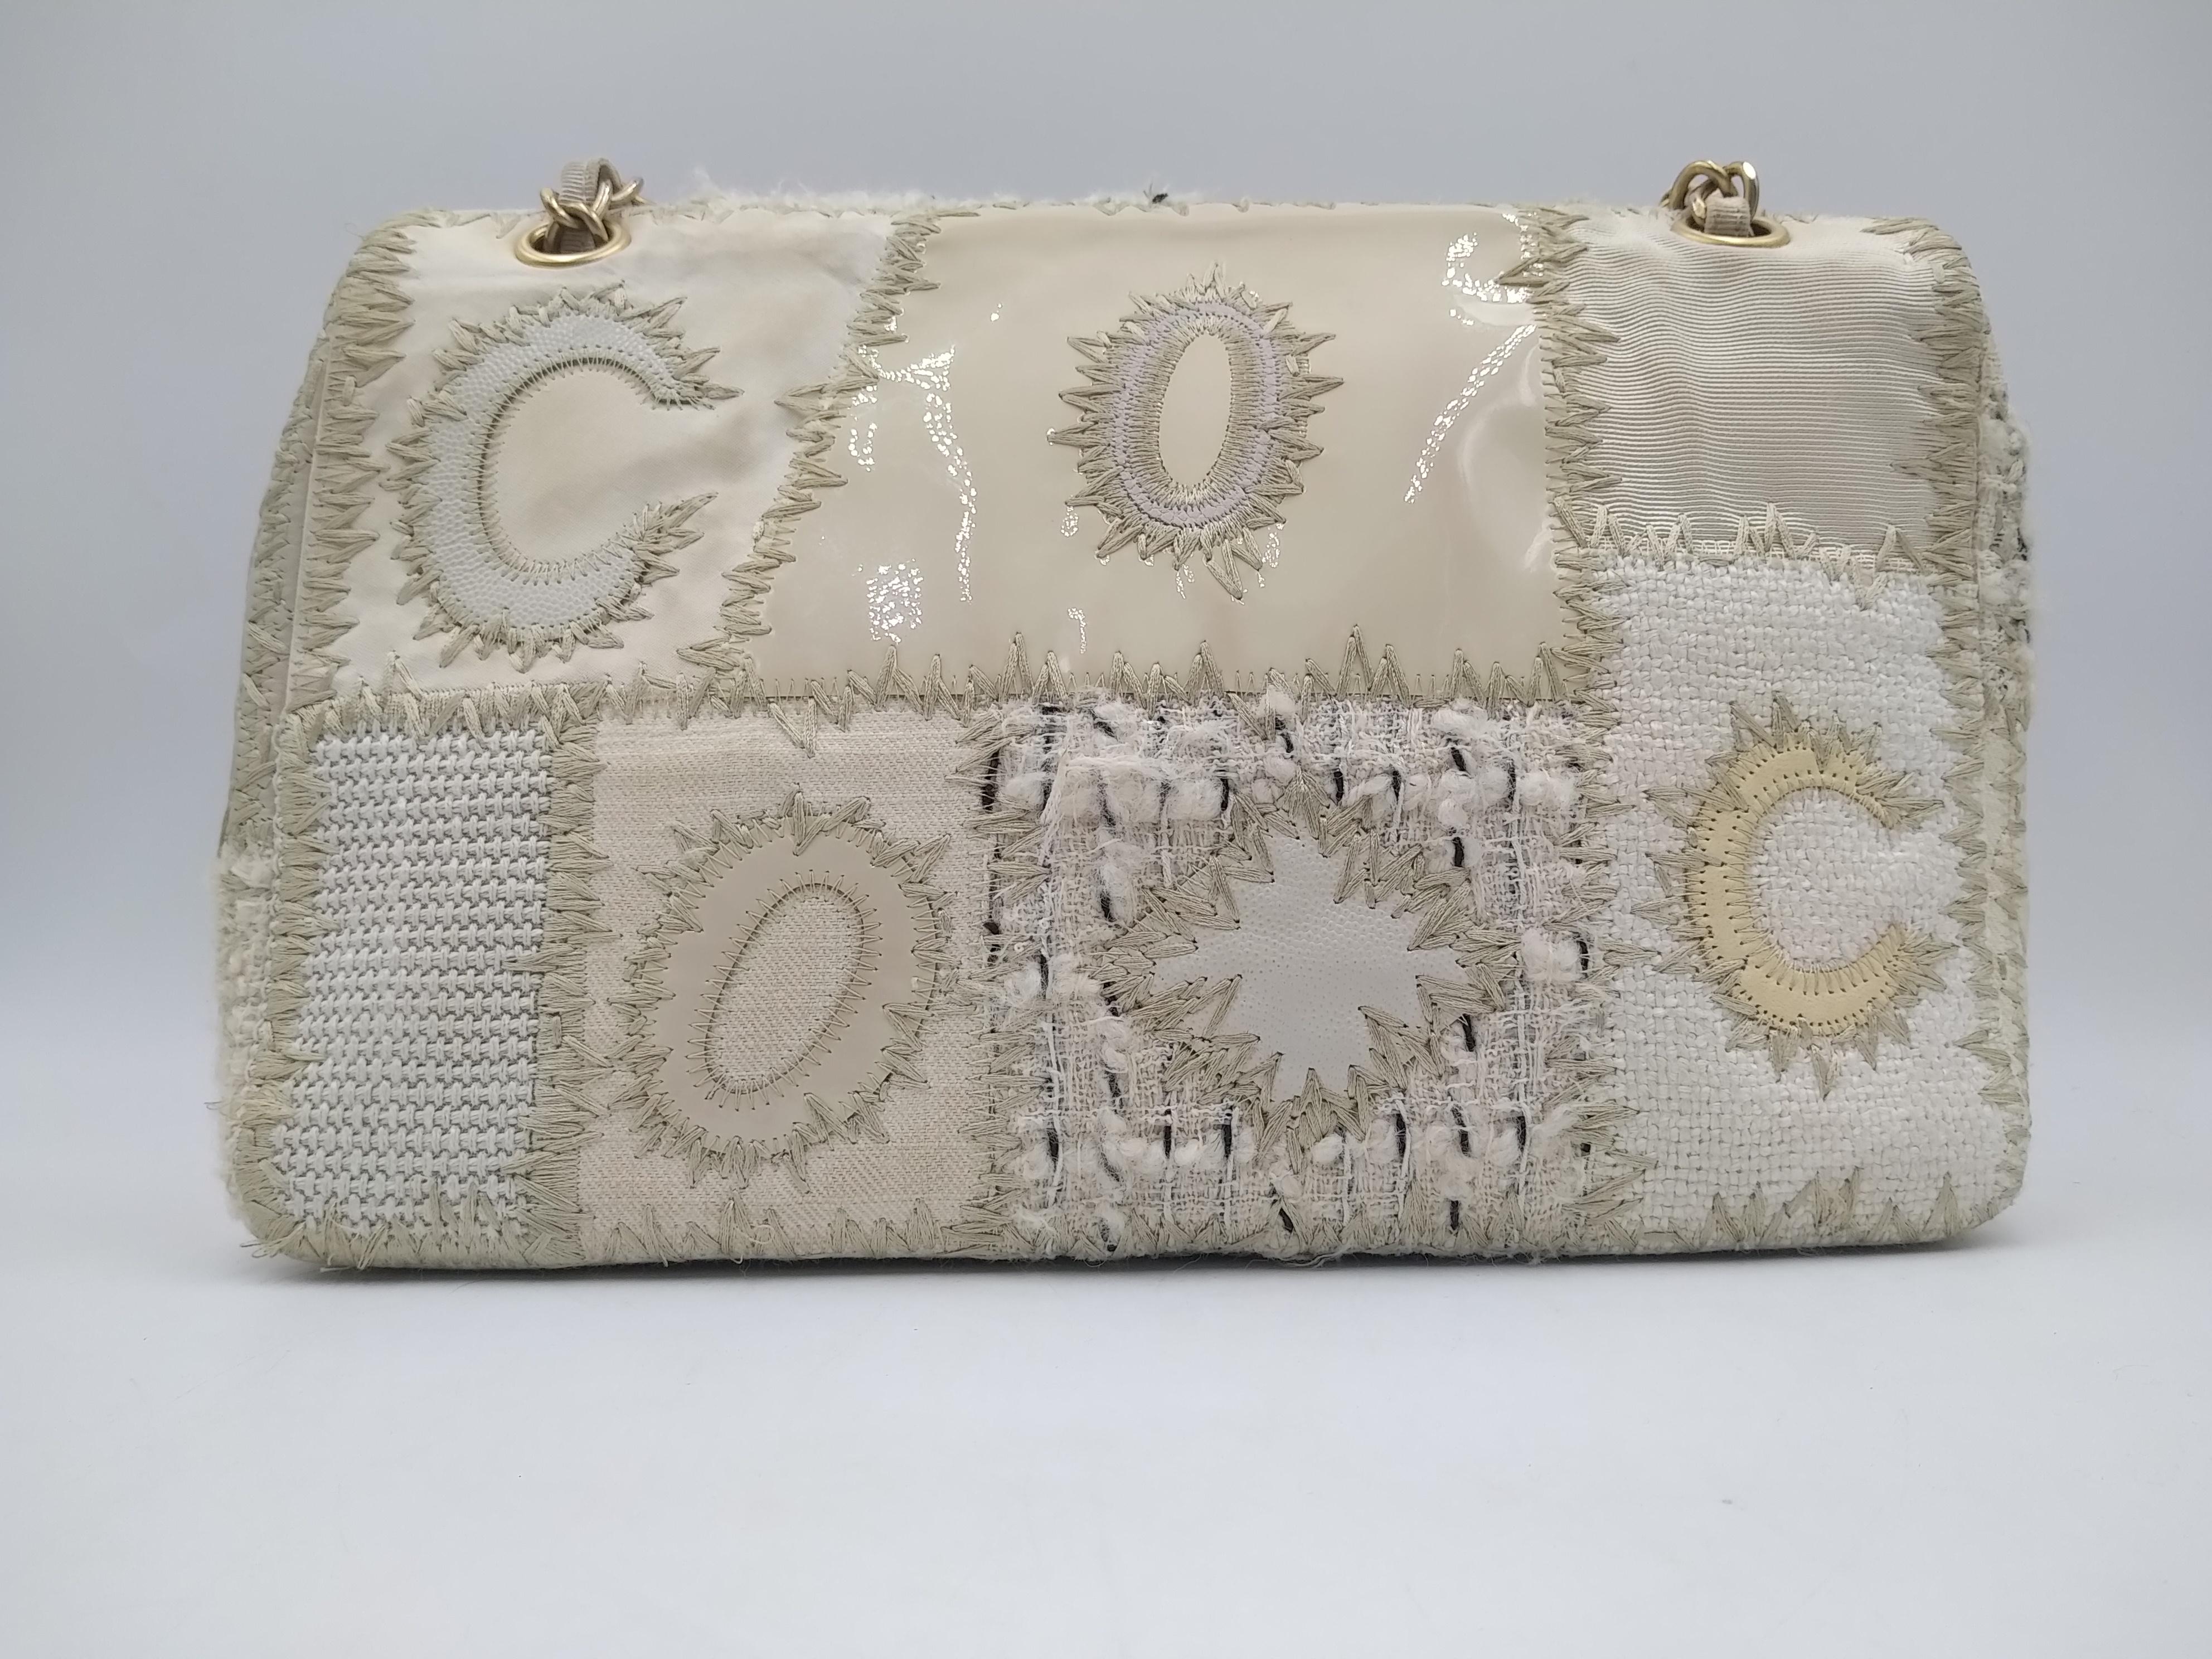 Chanel White Medium Tweed Flap Bag, 2018.
-100% authentic Chanel
-tweed and canvas, leather trim
- woven chain shoulder strap
- front flap with CC twist closure
- interior zip
- interior slide pockets
- Booklet, authenticity card, dustbag and box